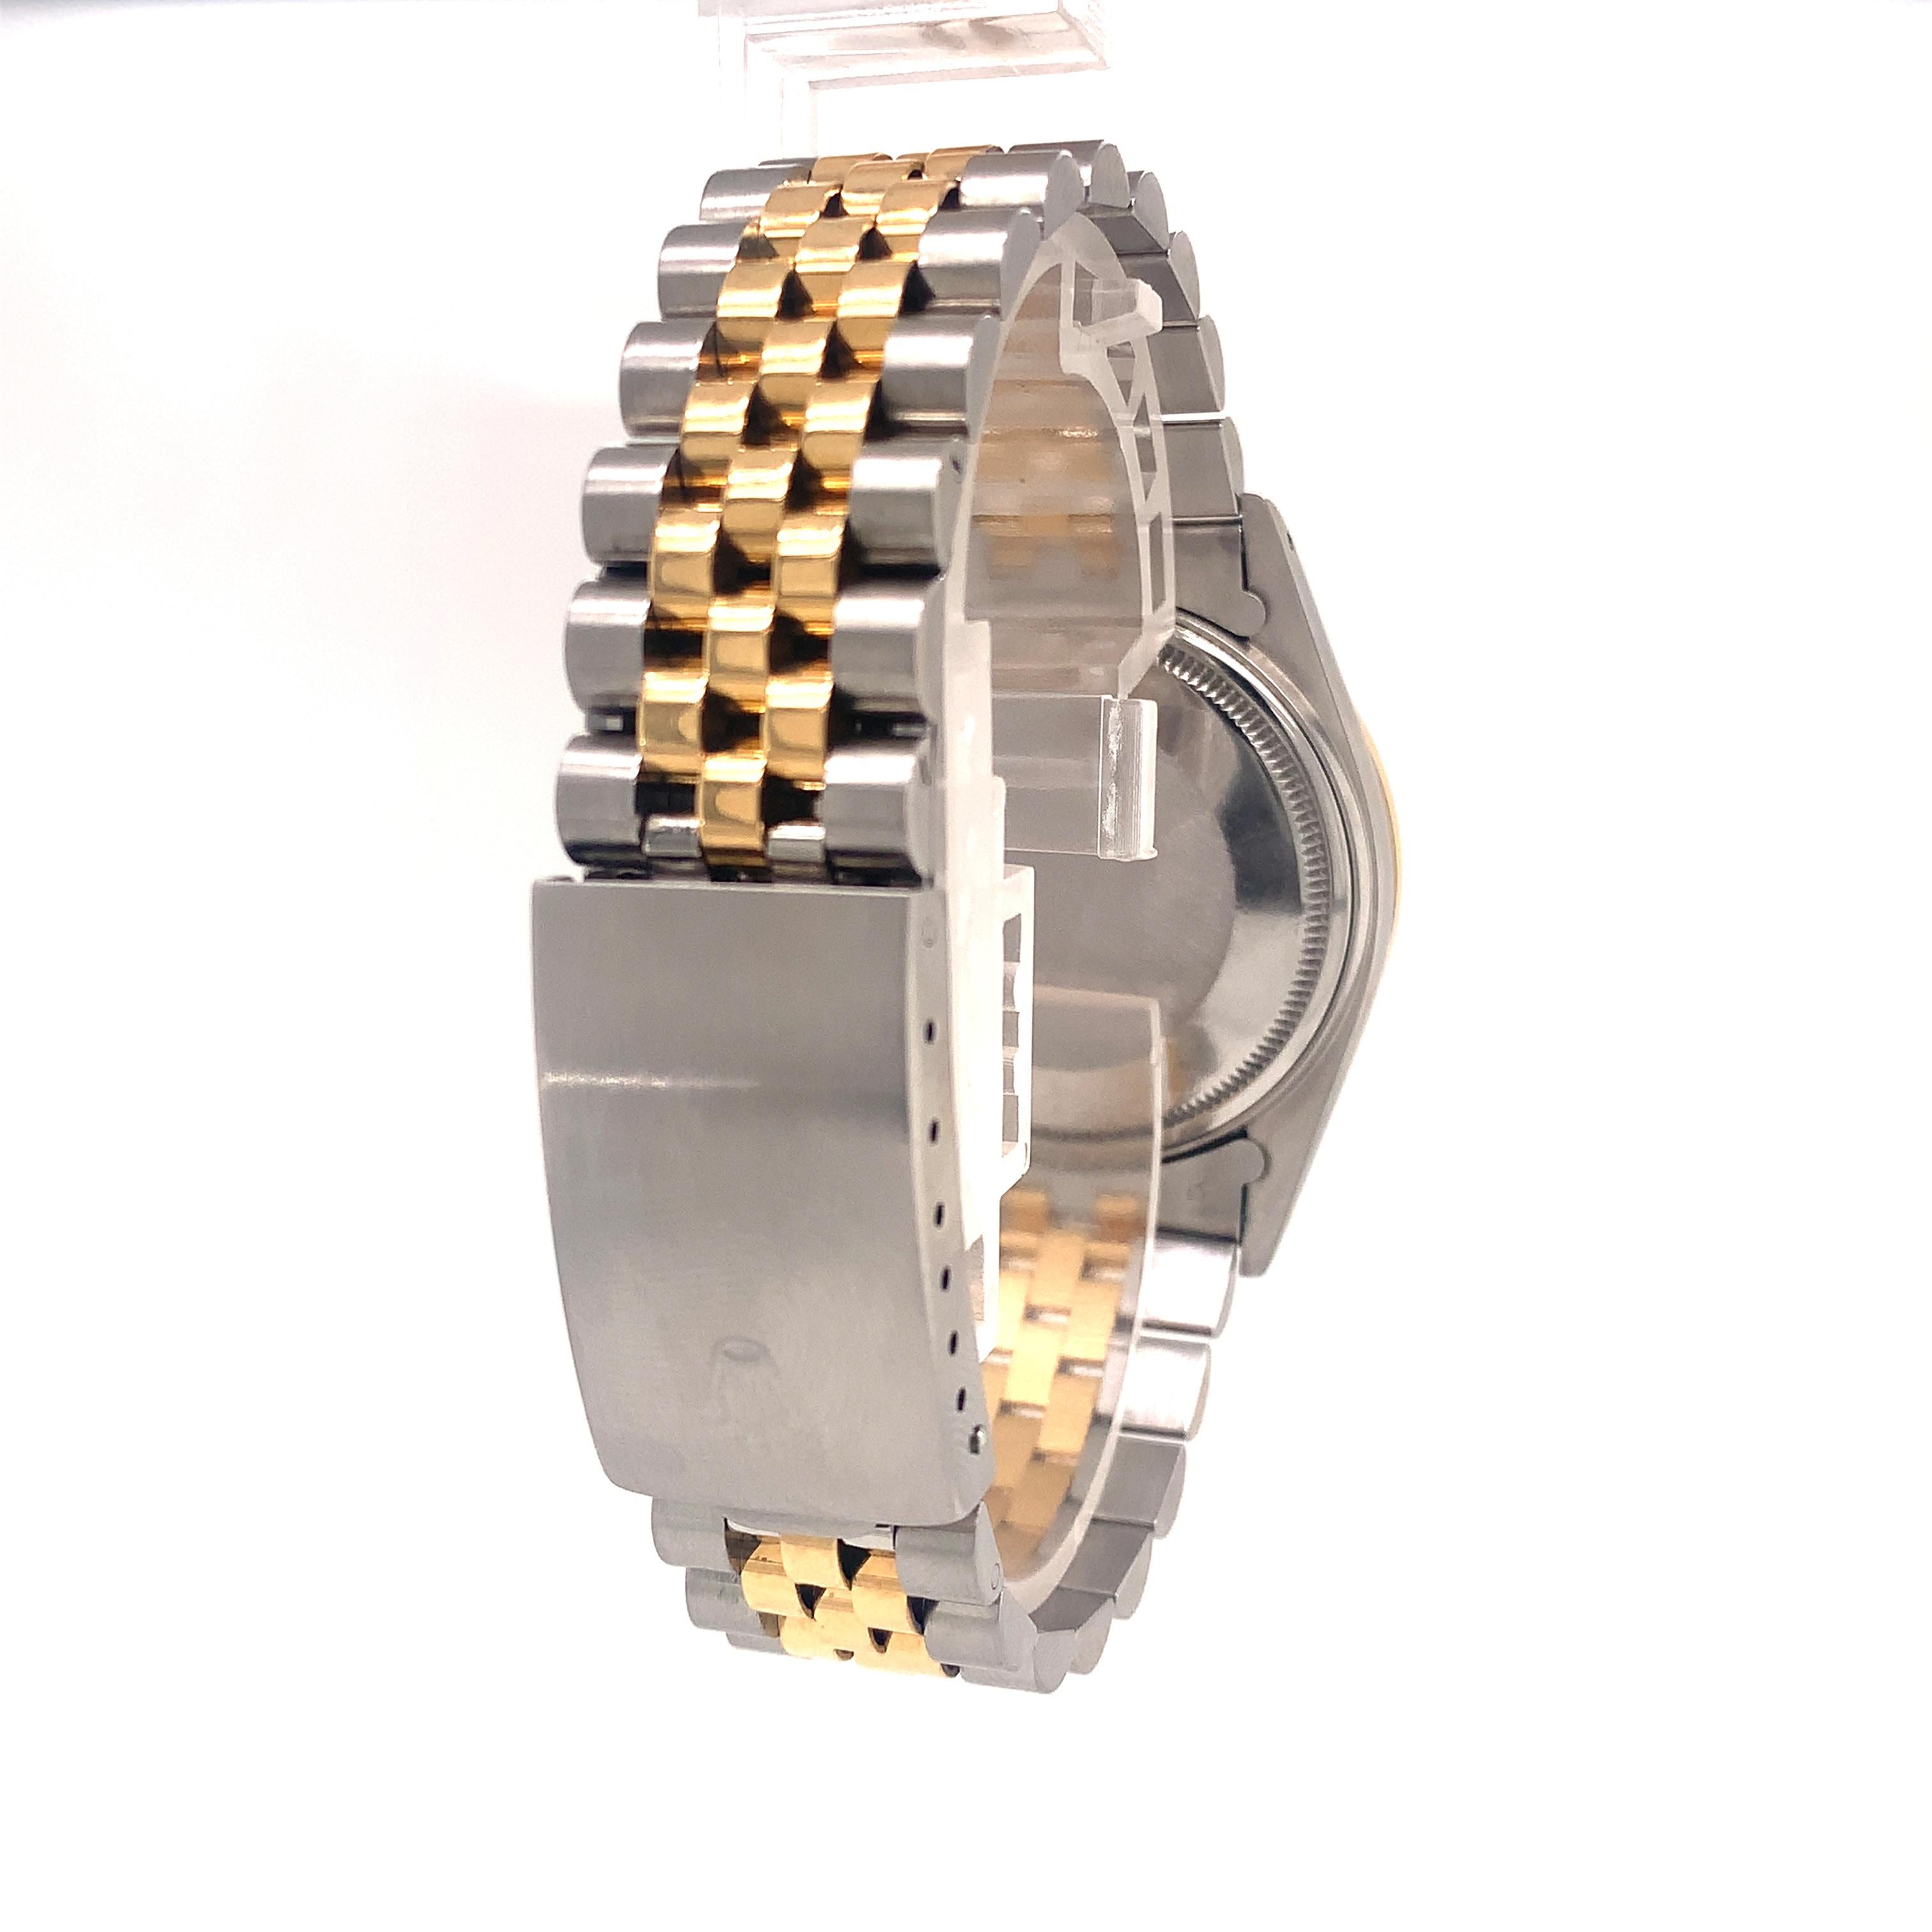 Rolex Datejust Gold/Steel Jubilee with Diamond Bezel 16013 In Excellent Condition For Sale In Aventura, FL